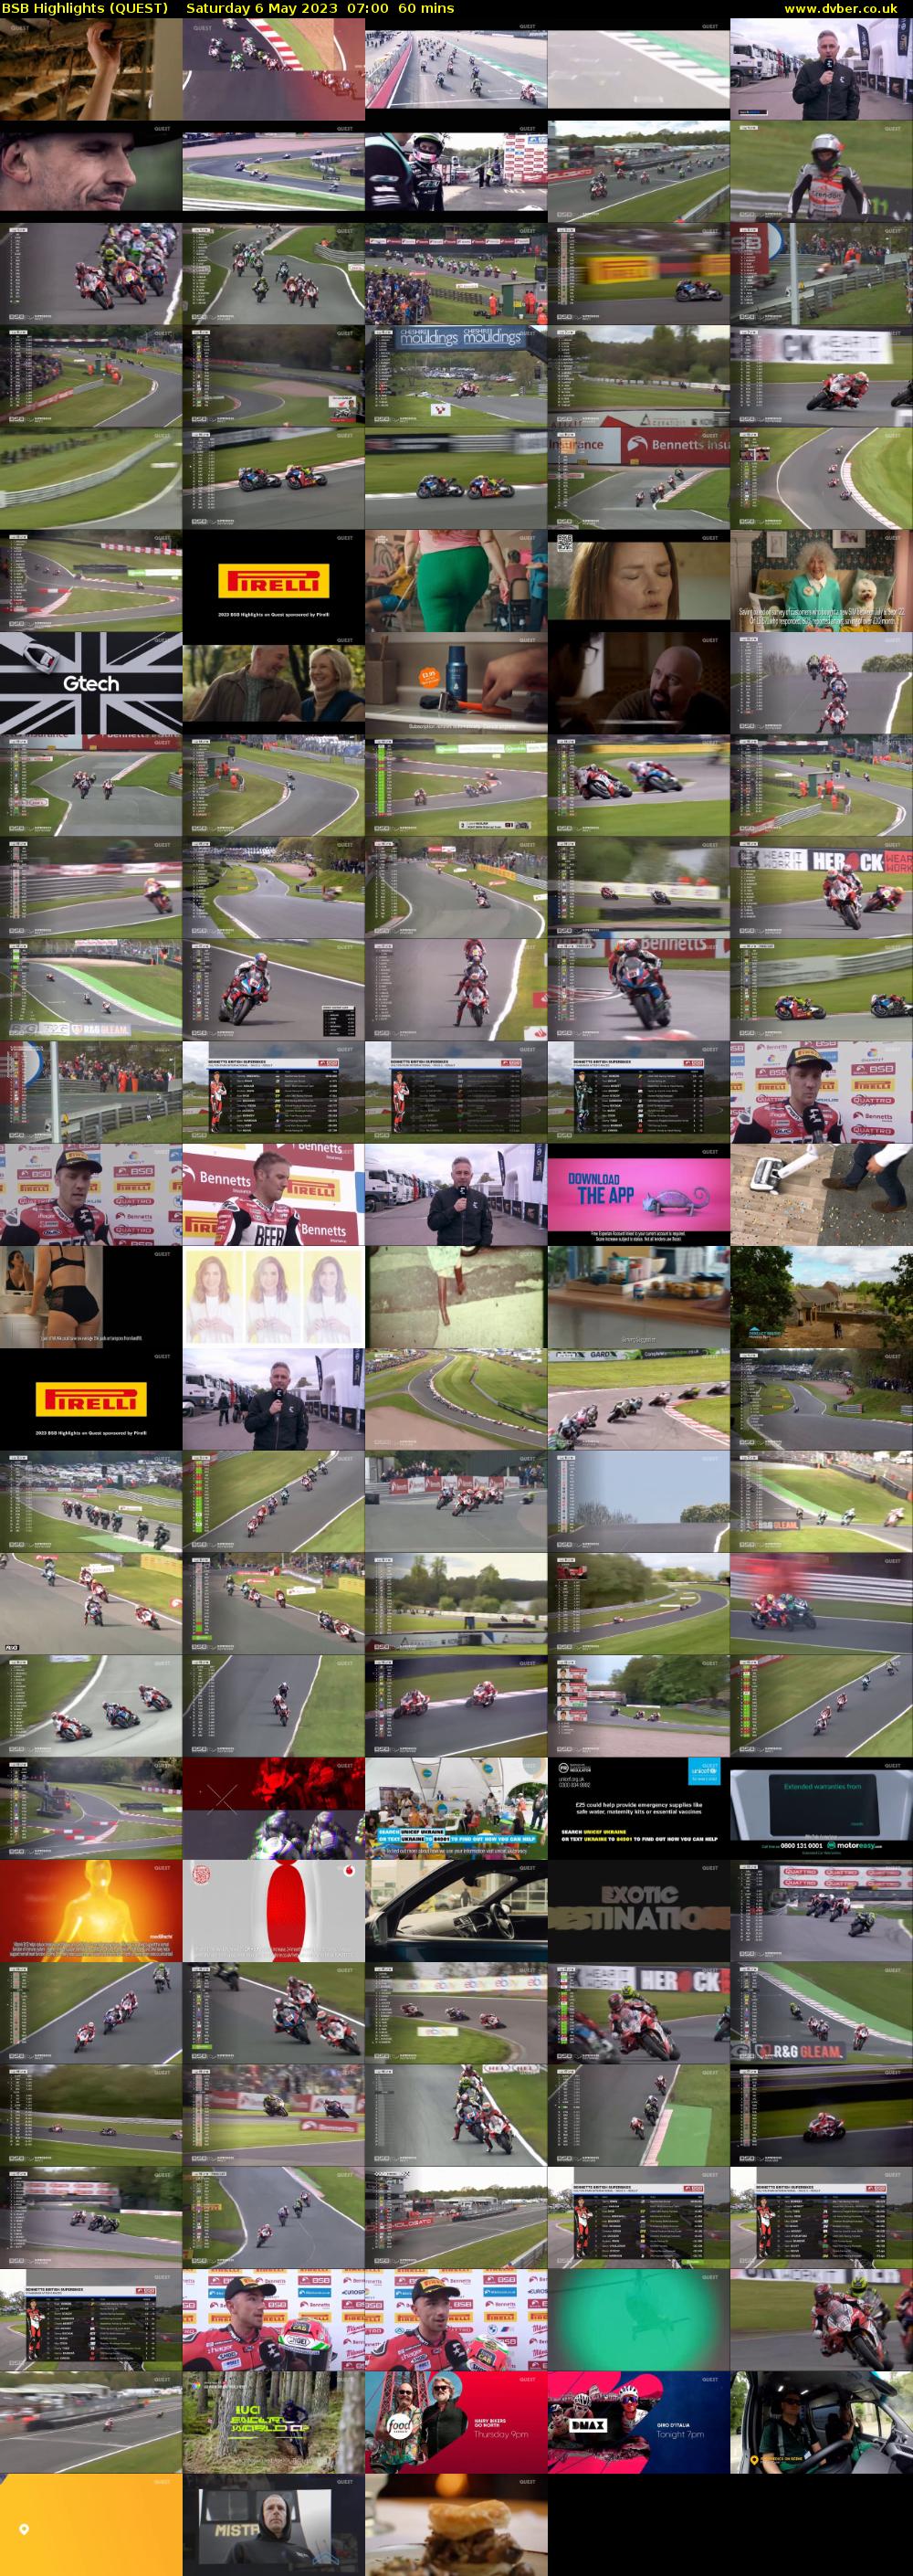 BSB Highlights (QUEST) Saturday 6 May 2023 07:00 - 08:00